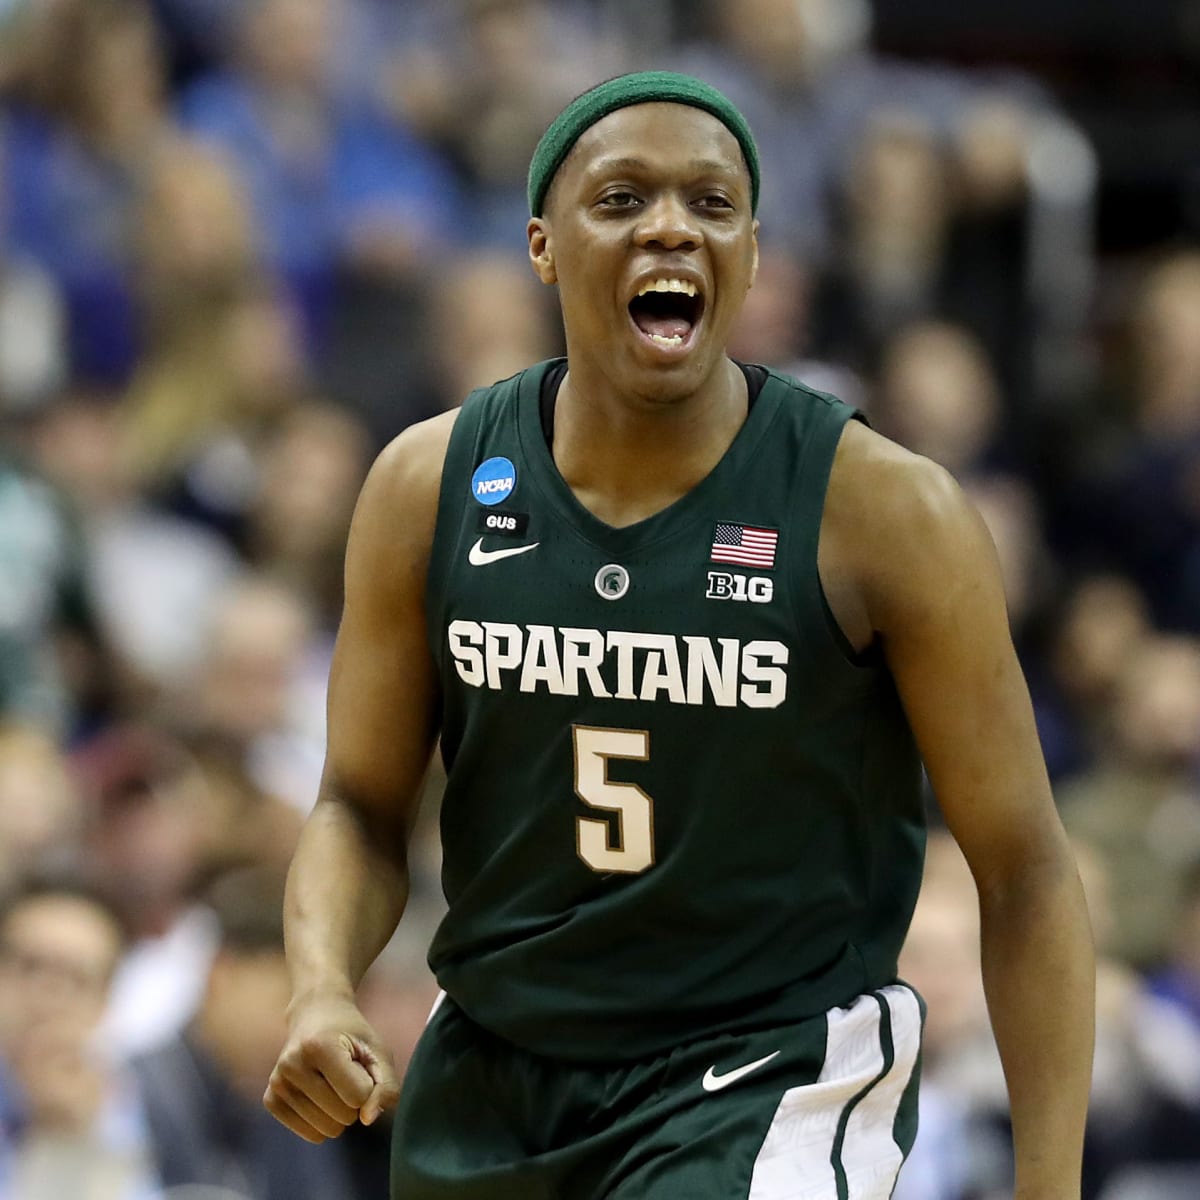 Cassius Winston is the Final Four hero we can aspire to be